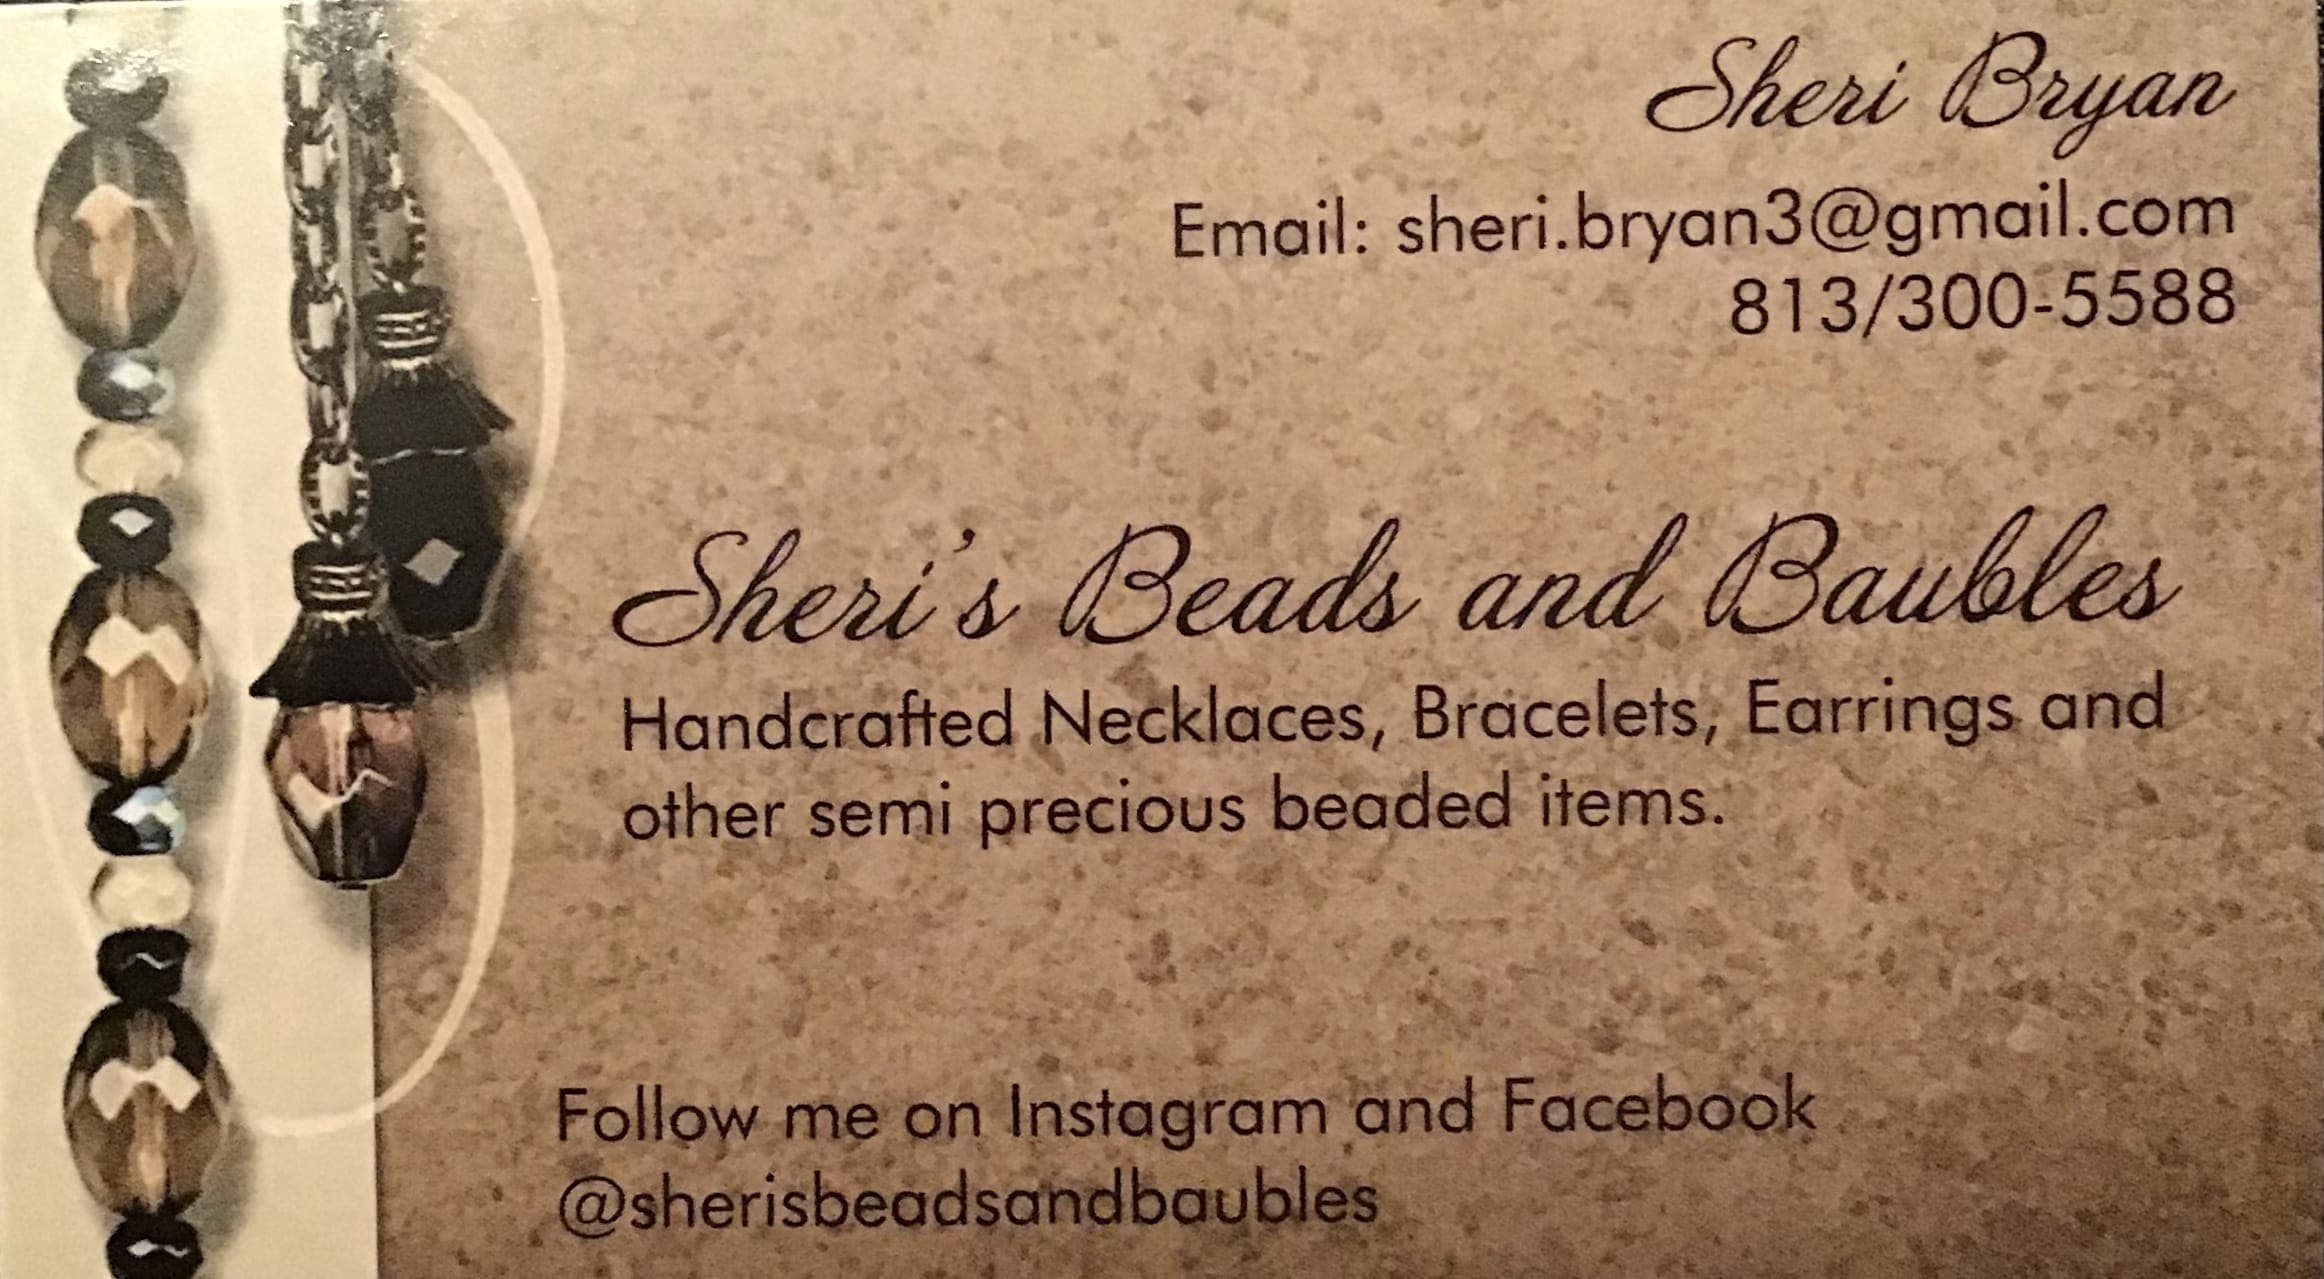 Sheri’s Beads and Baubles